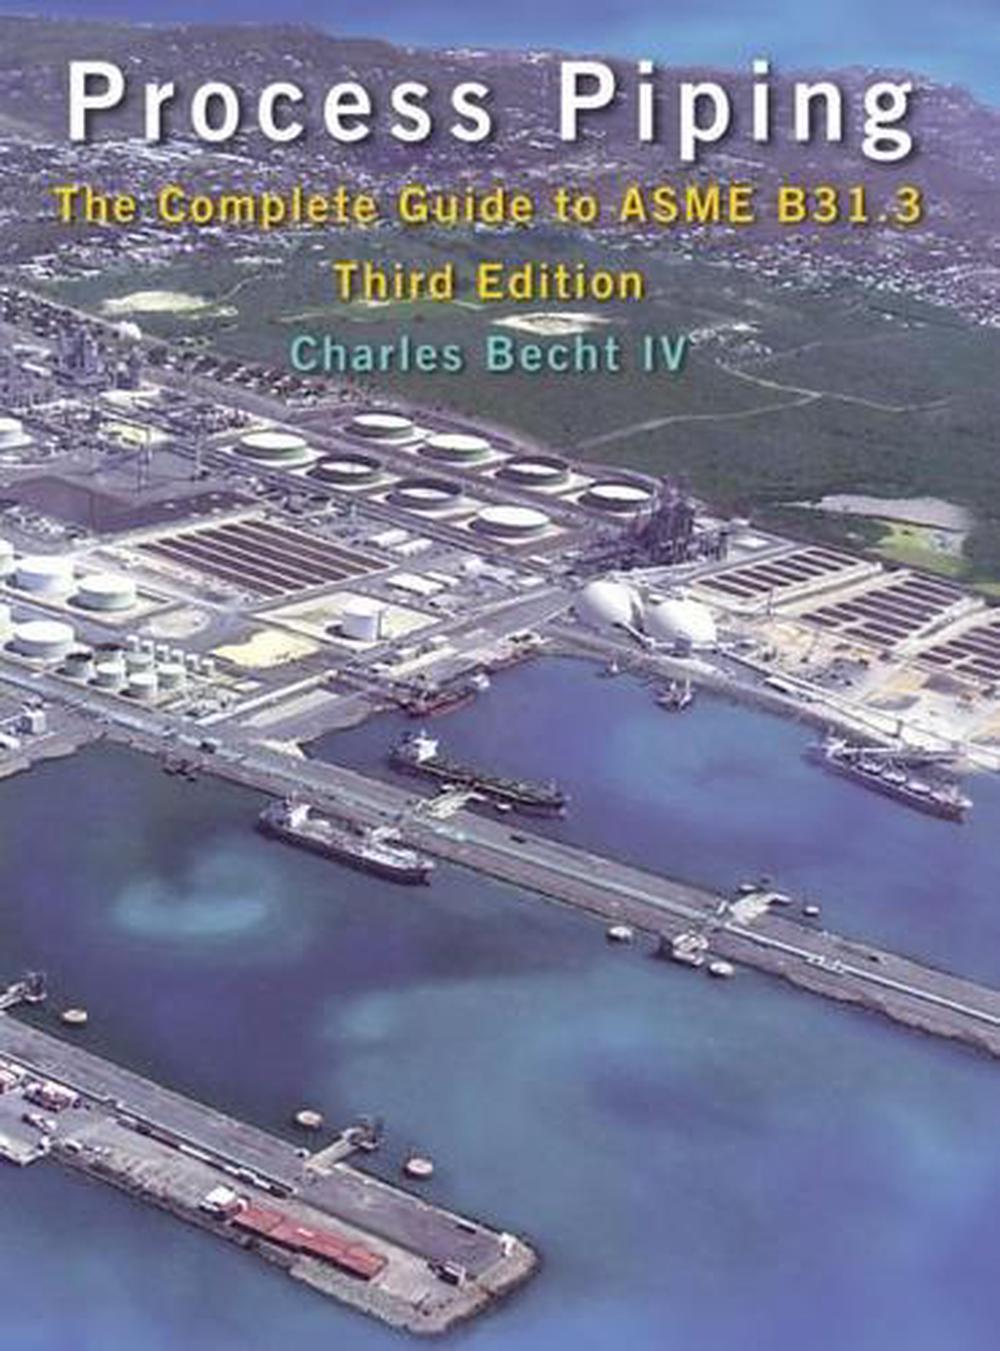 Process Piping The Complete Guide to ASME B31.3 by Charles IV Becht (English) H eBay